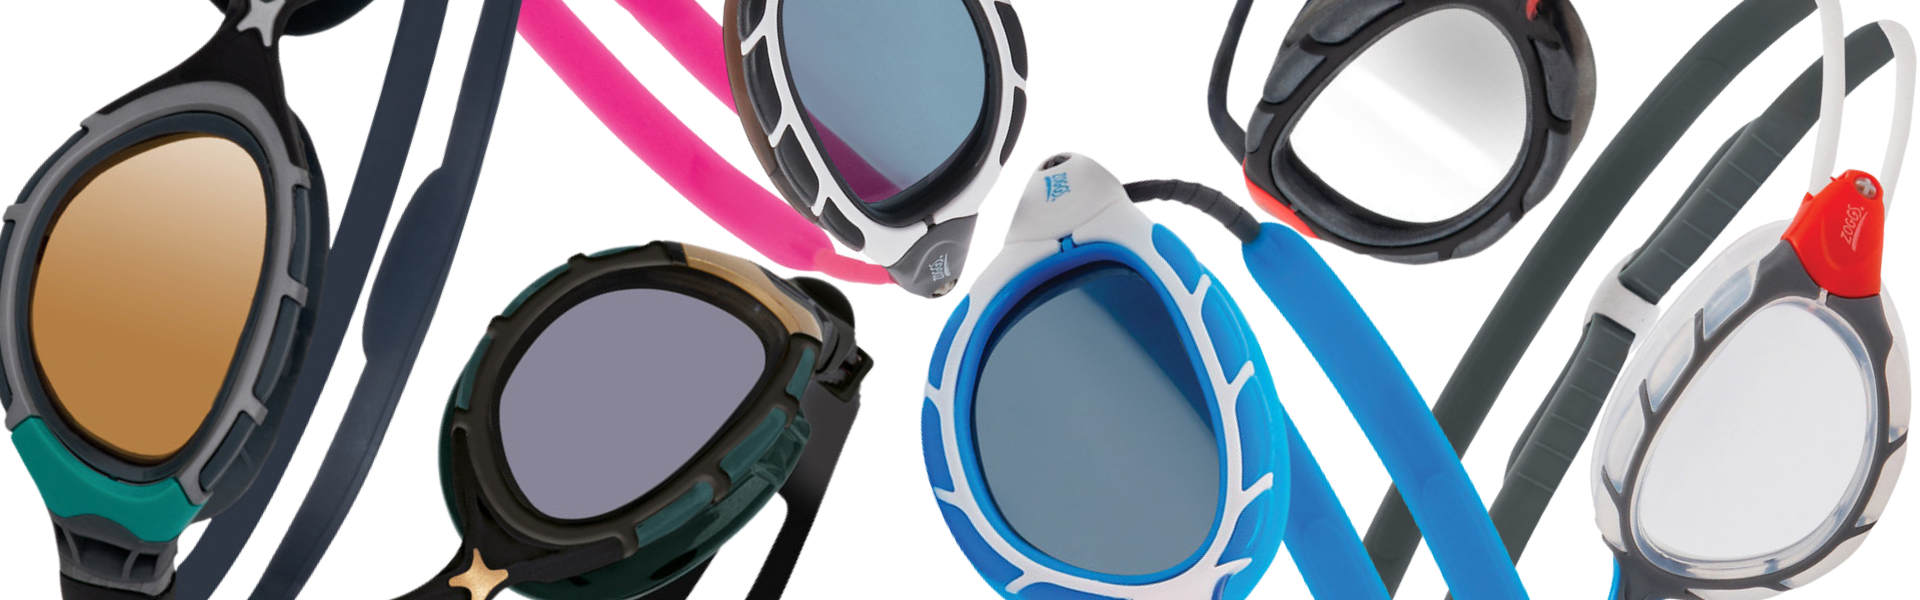 collection of goggles with mirror, colour, clear and polarized lenses